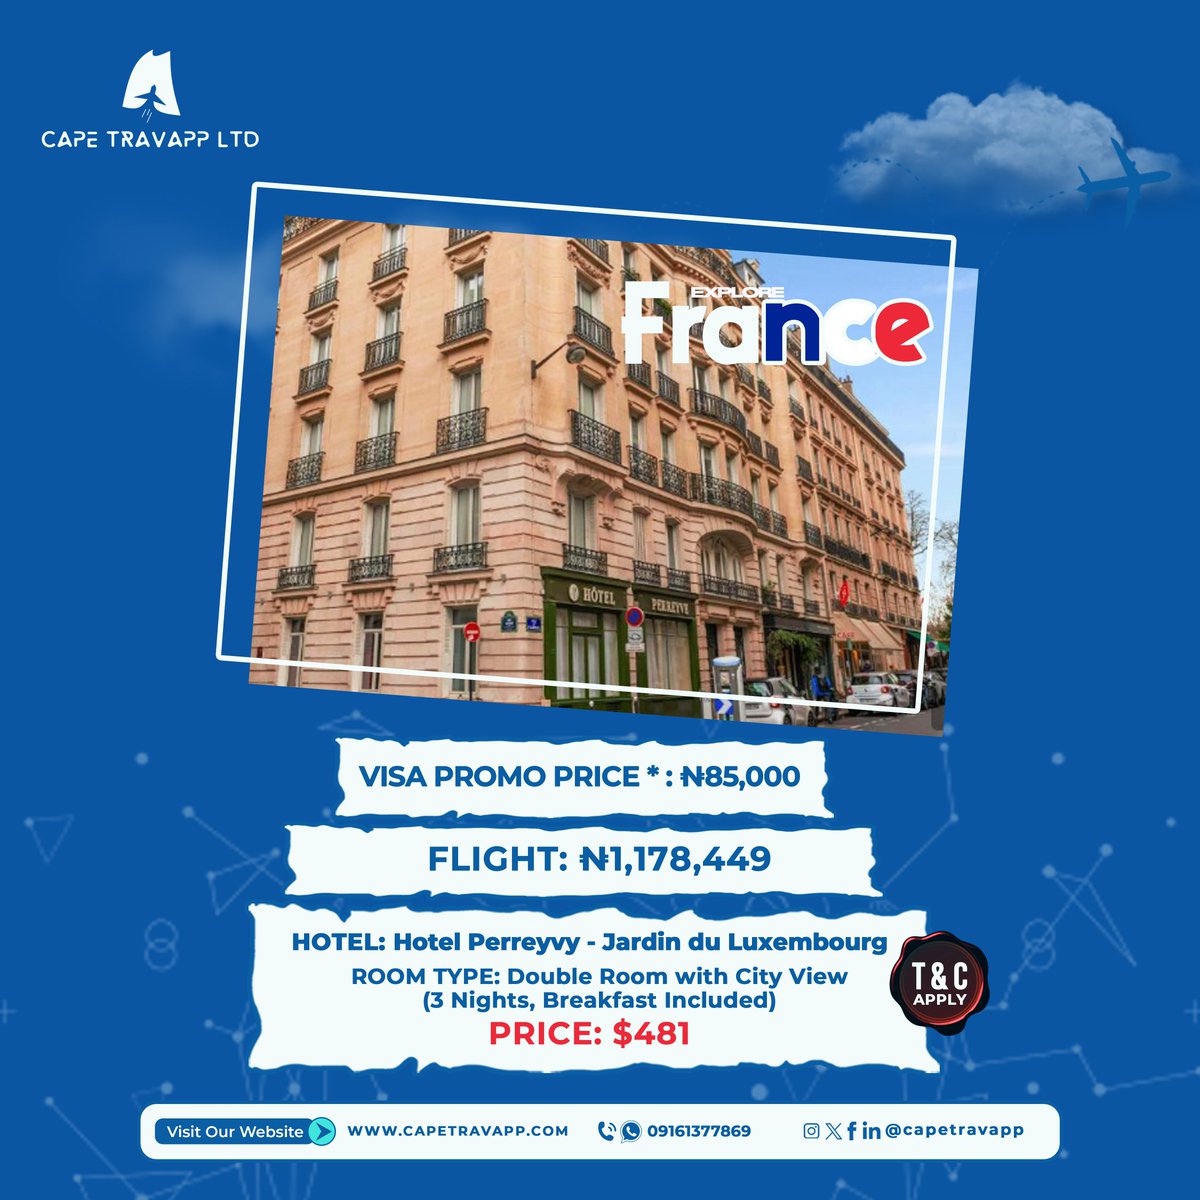 Unlocking the Magic of France 🇫🇷✨ Visa ✓ Flight ✓ Hotel ✓ All Set for Your French Adventure!

#travelgoals #explorefrance #francetravels #paris #louvre #capetravels #capetravapp #packages #travel #instatravel #holiday #holidayfun #vacation #trip #tourism #group